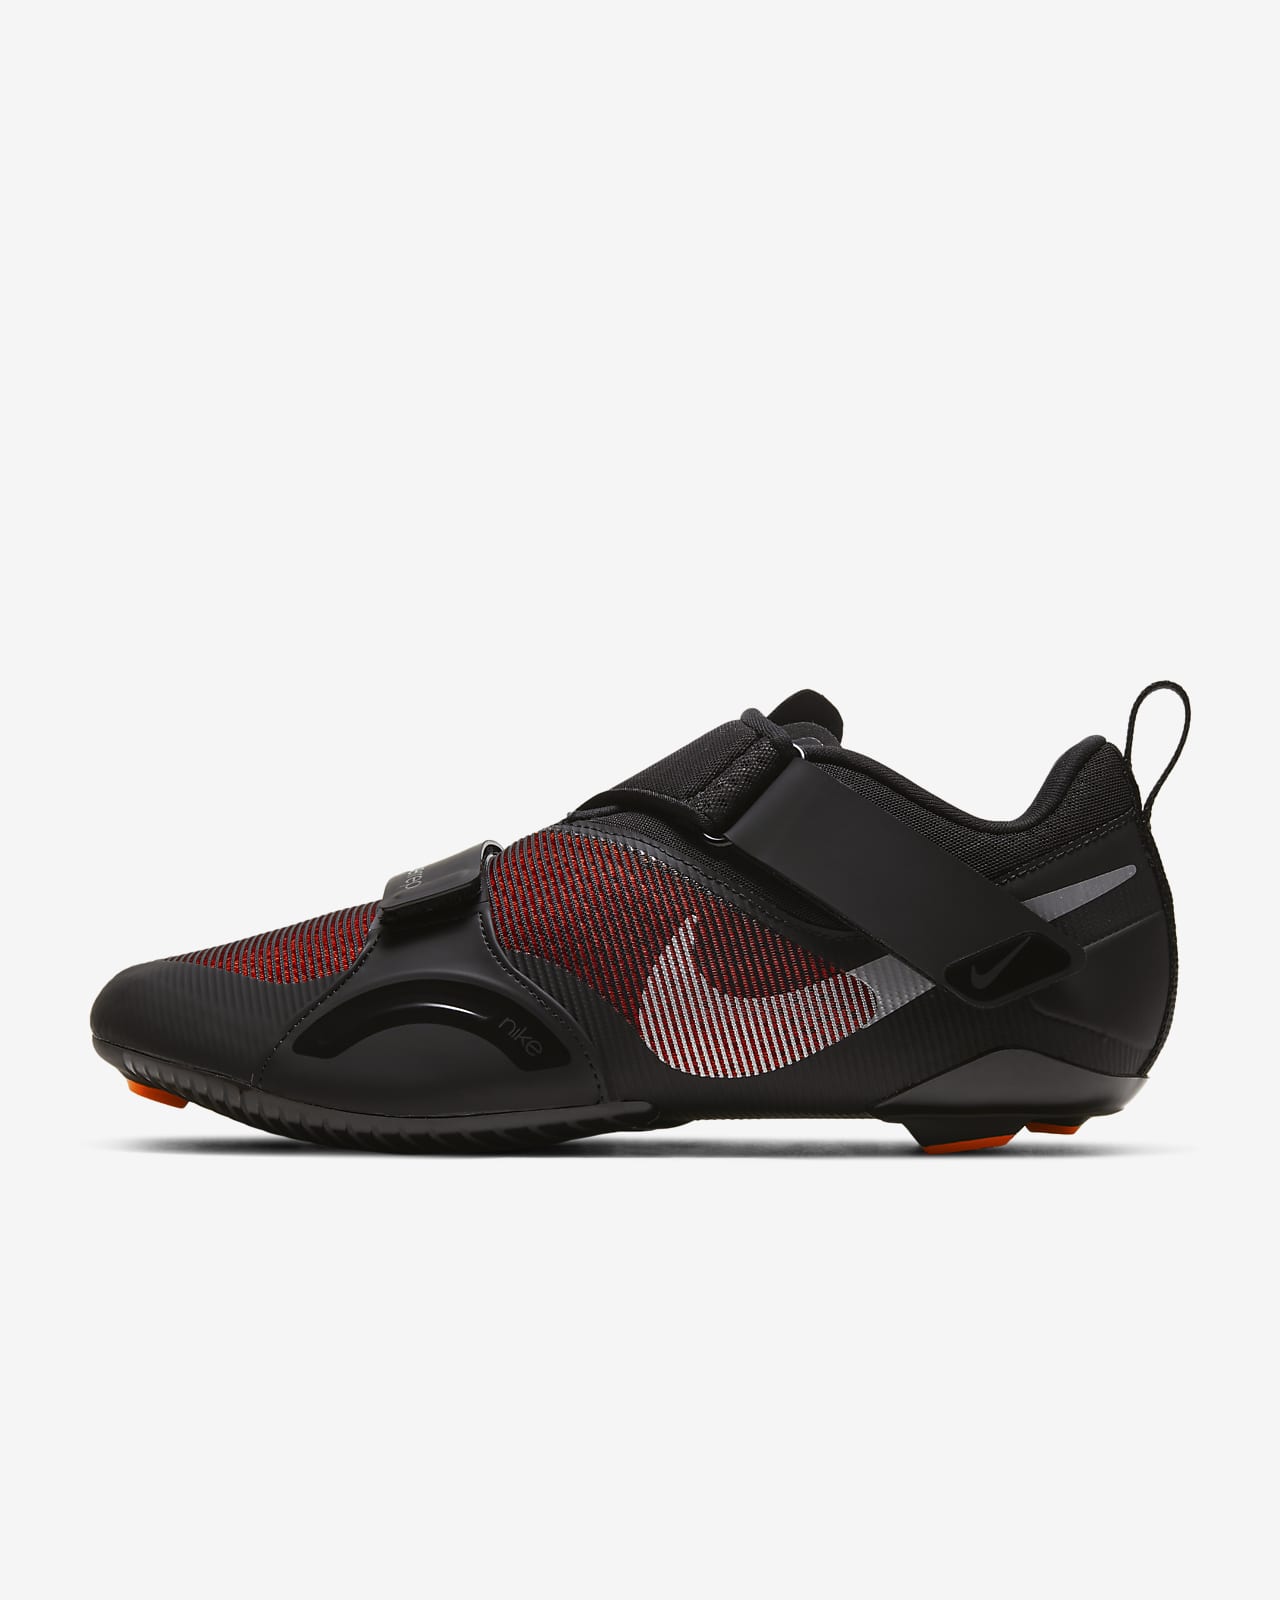 nike superrep spin shoes